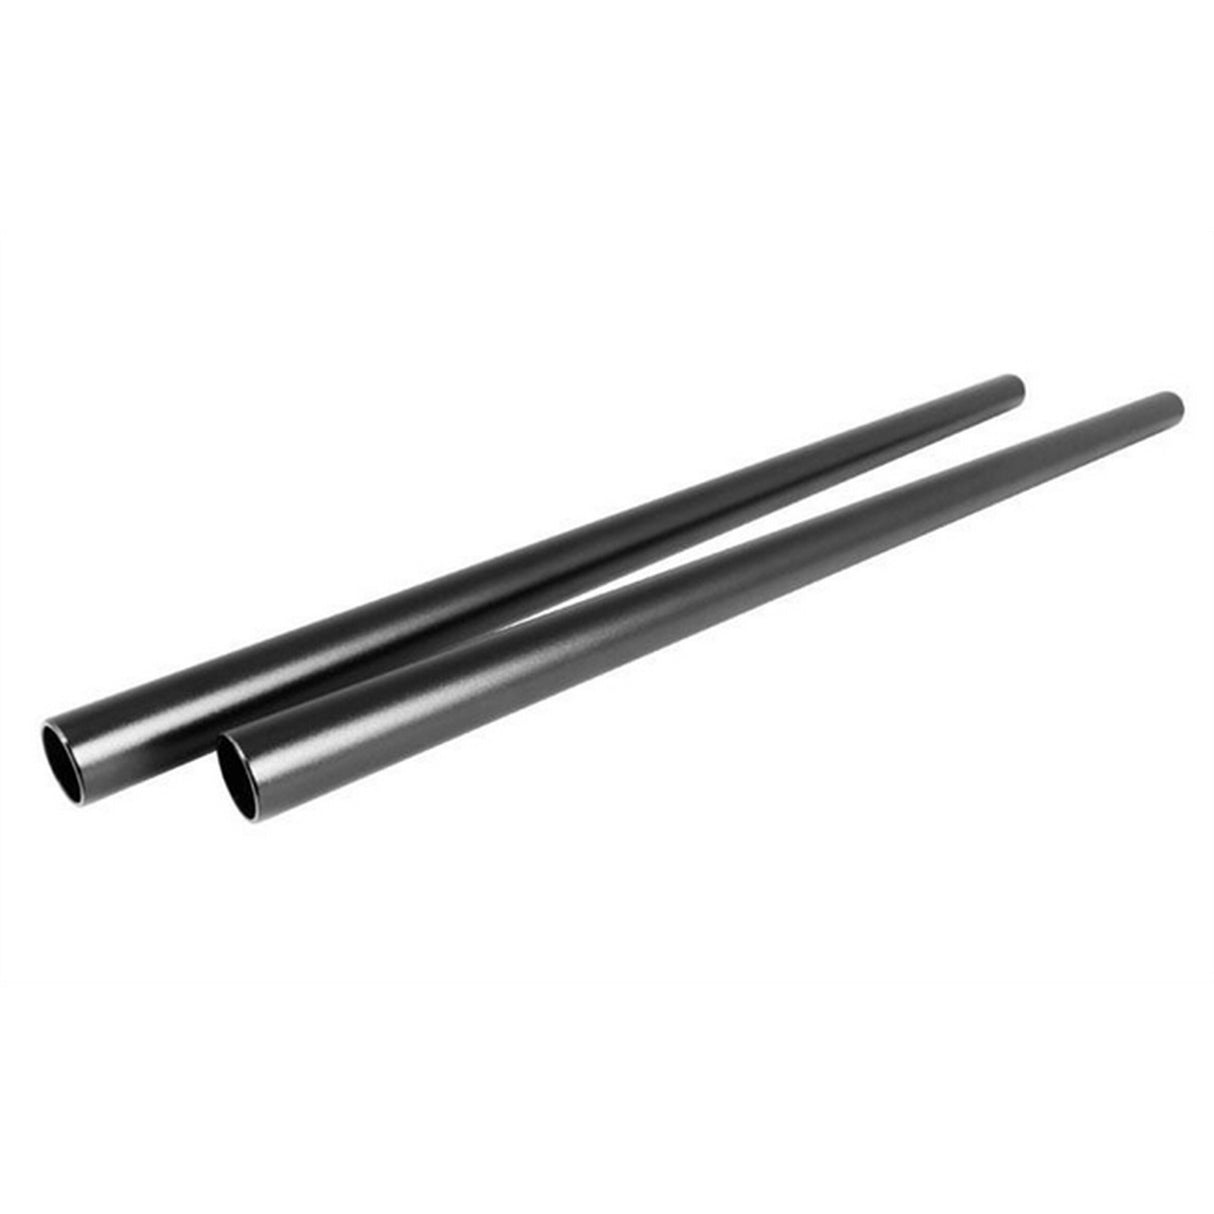 Genustech GMB-350 Support Bars, 350mm, Pair